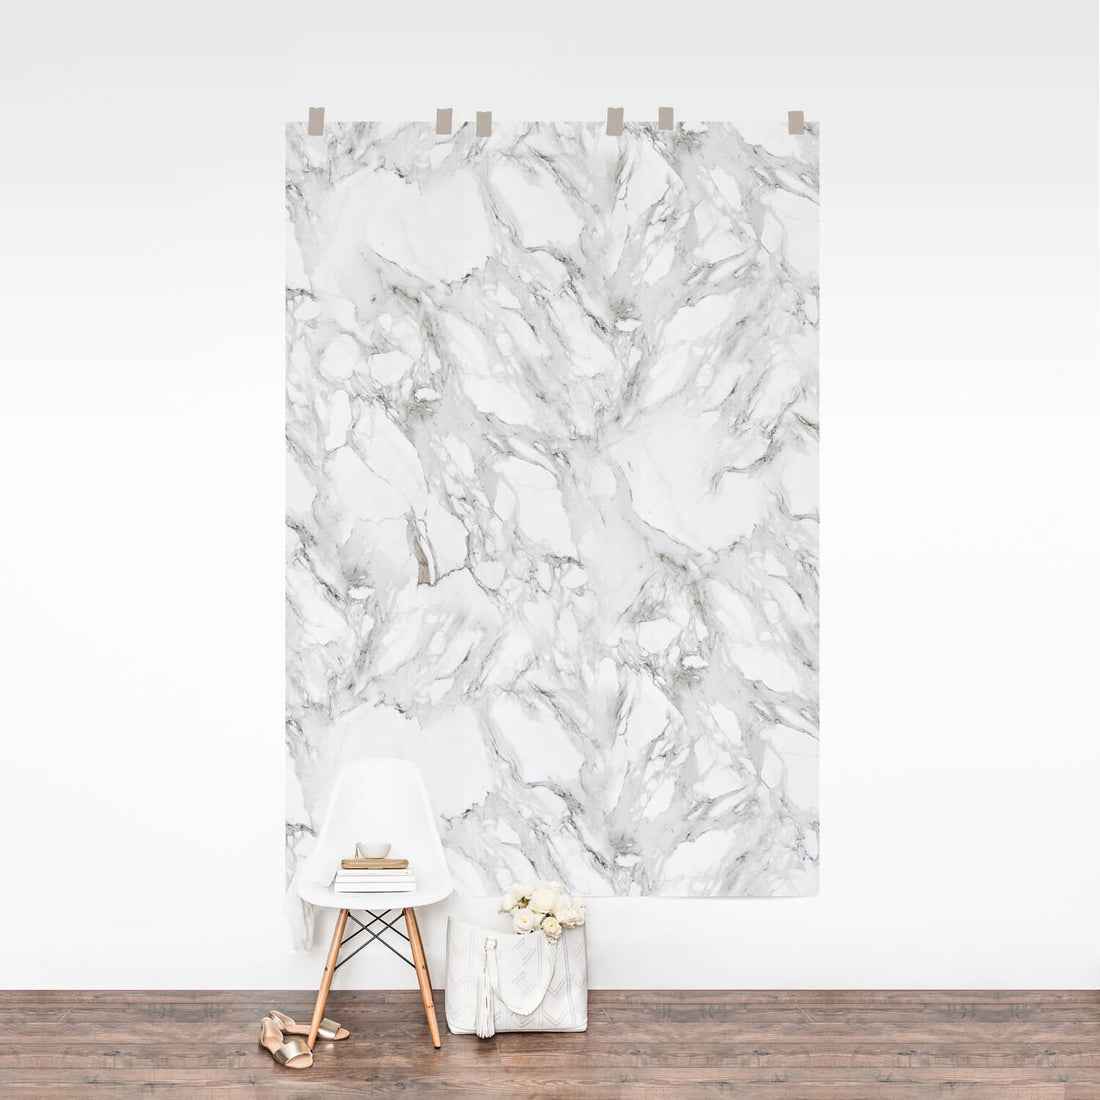 Repeating wall mural with white marble pattern